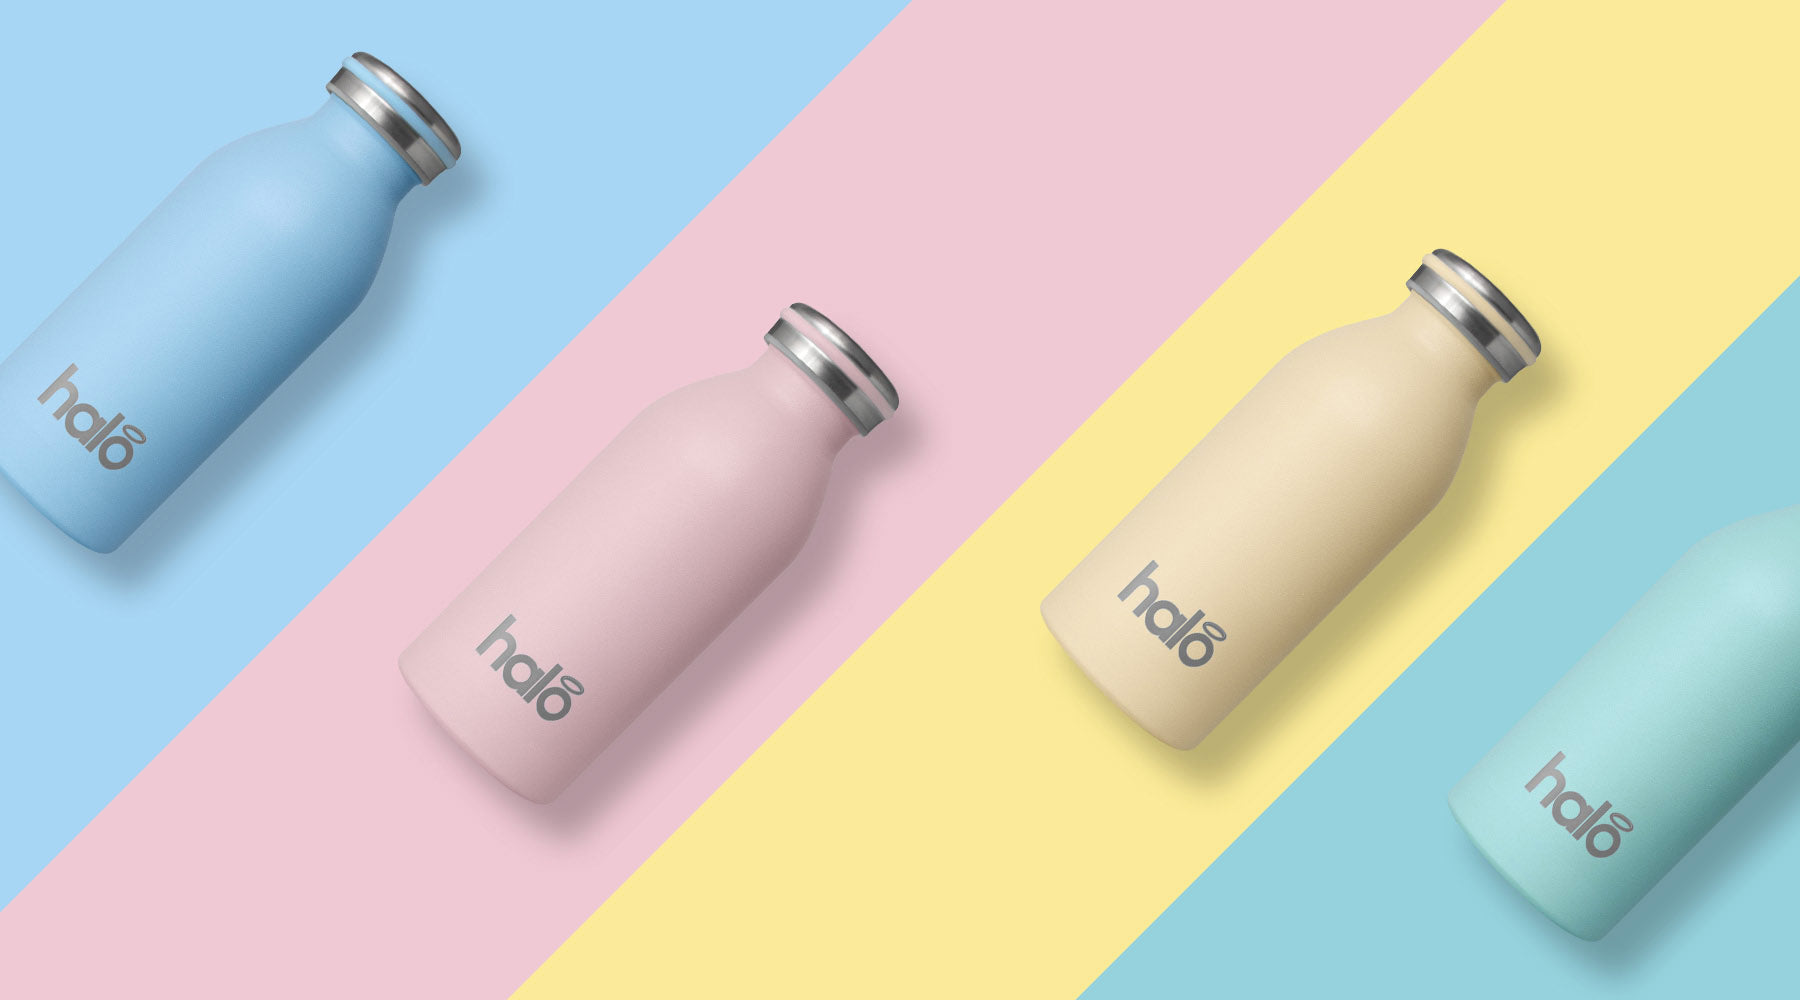 Halo Bottle small stainless steel reusable water bottles in pink, yellow, green and blue with coloured stripes.